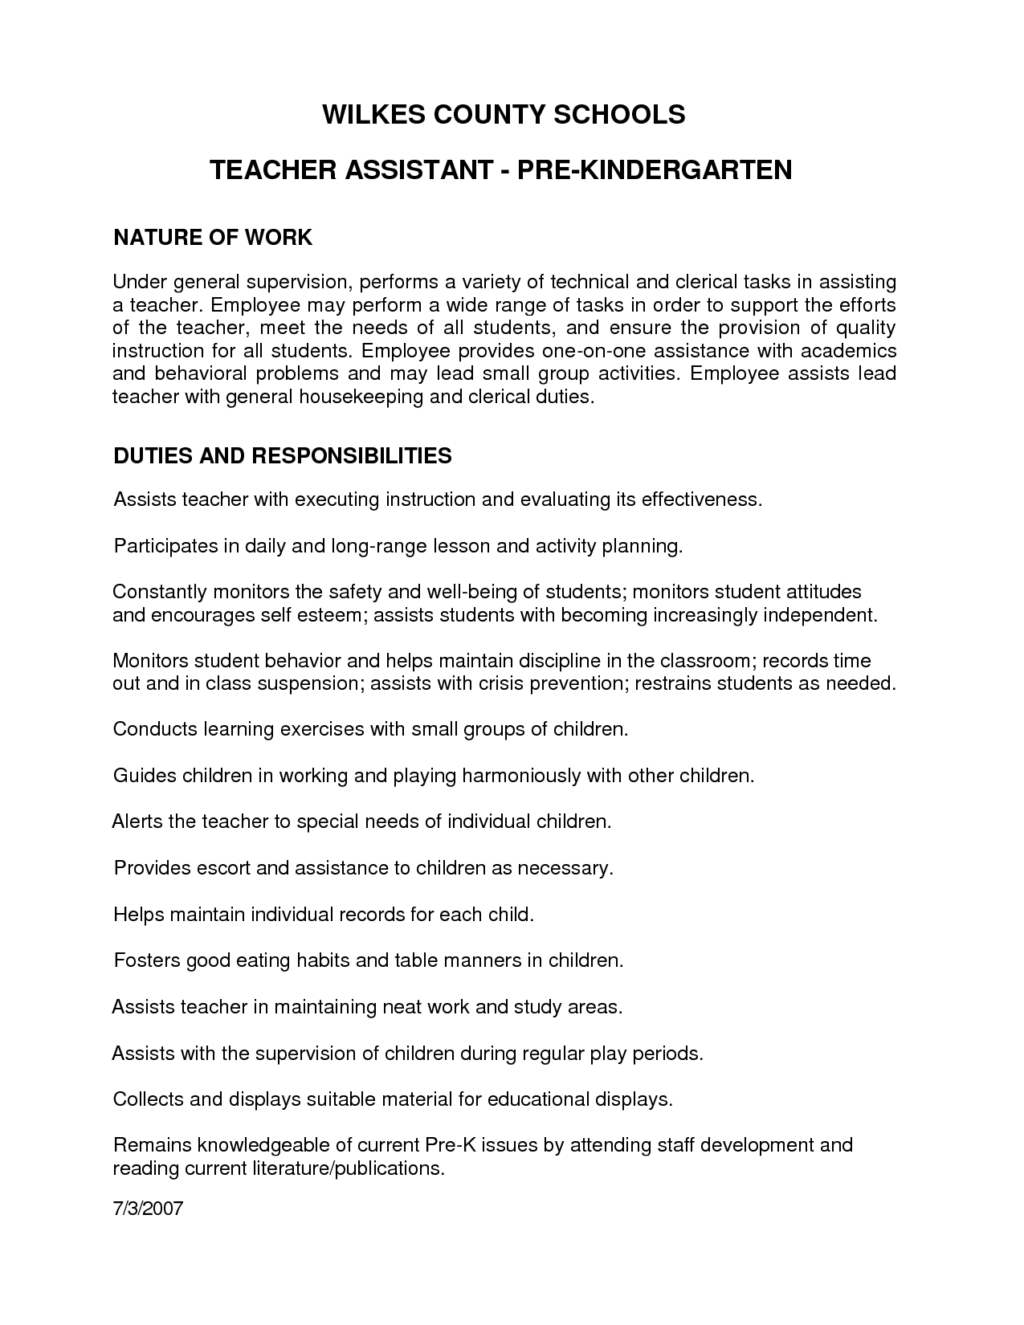 Letter Recommendation For Preschool Teacher Assistant Cover with regard to measurements 1024 X 1325